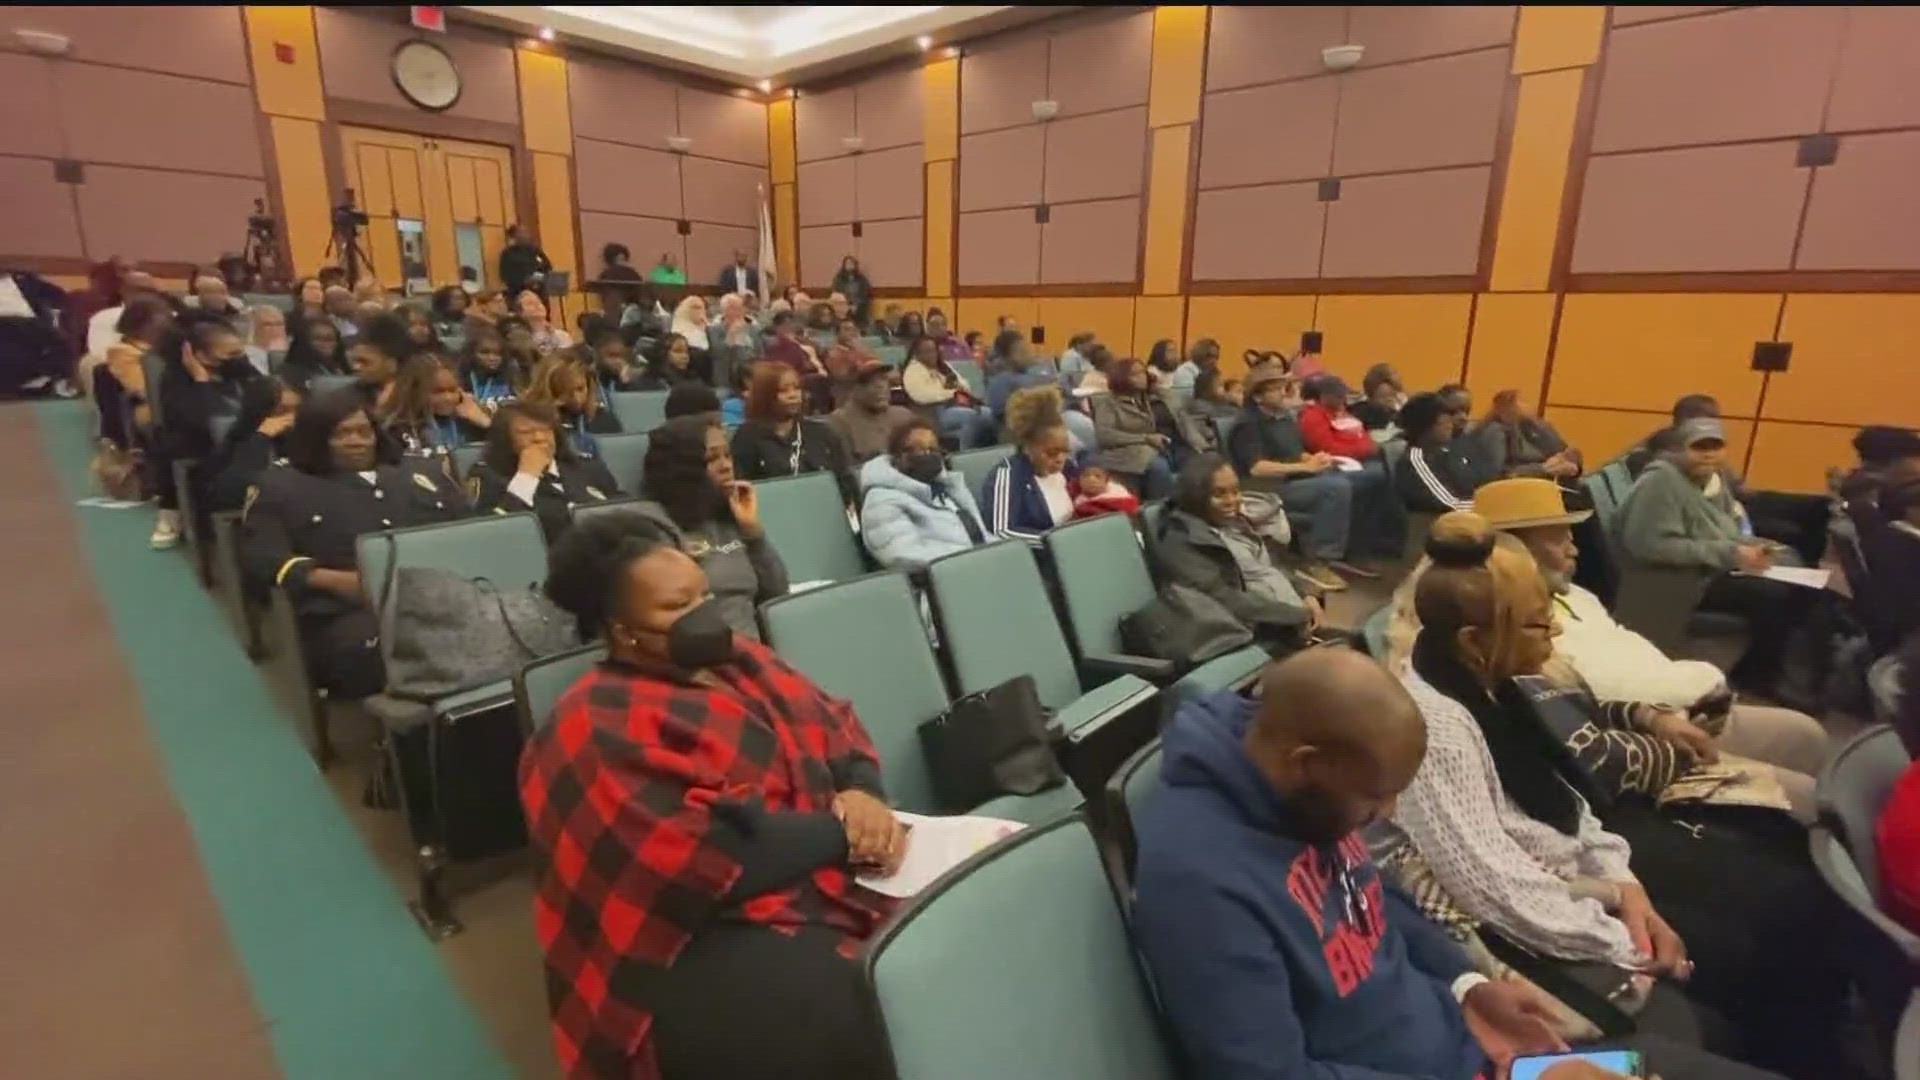 Despite a full house, the meeting didn't move forward due to council member absences.